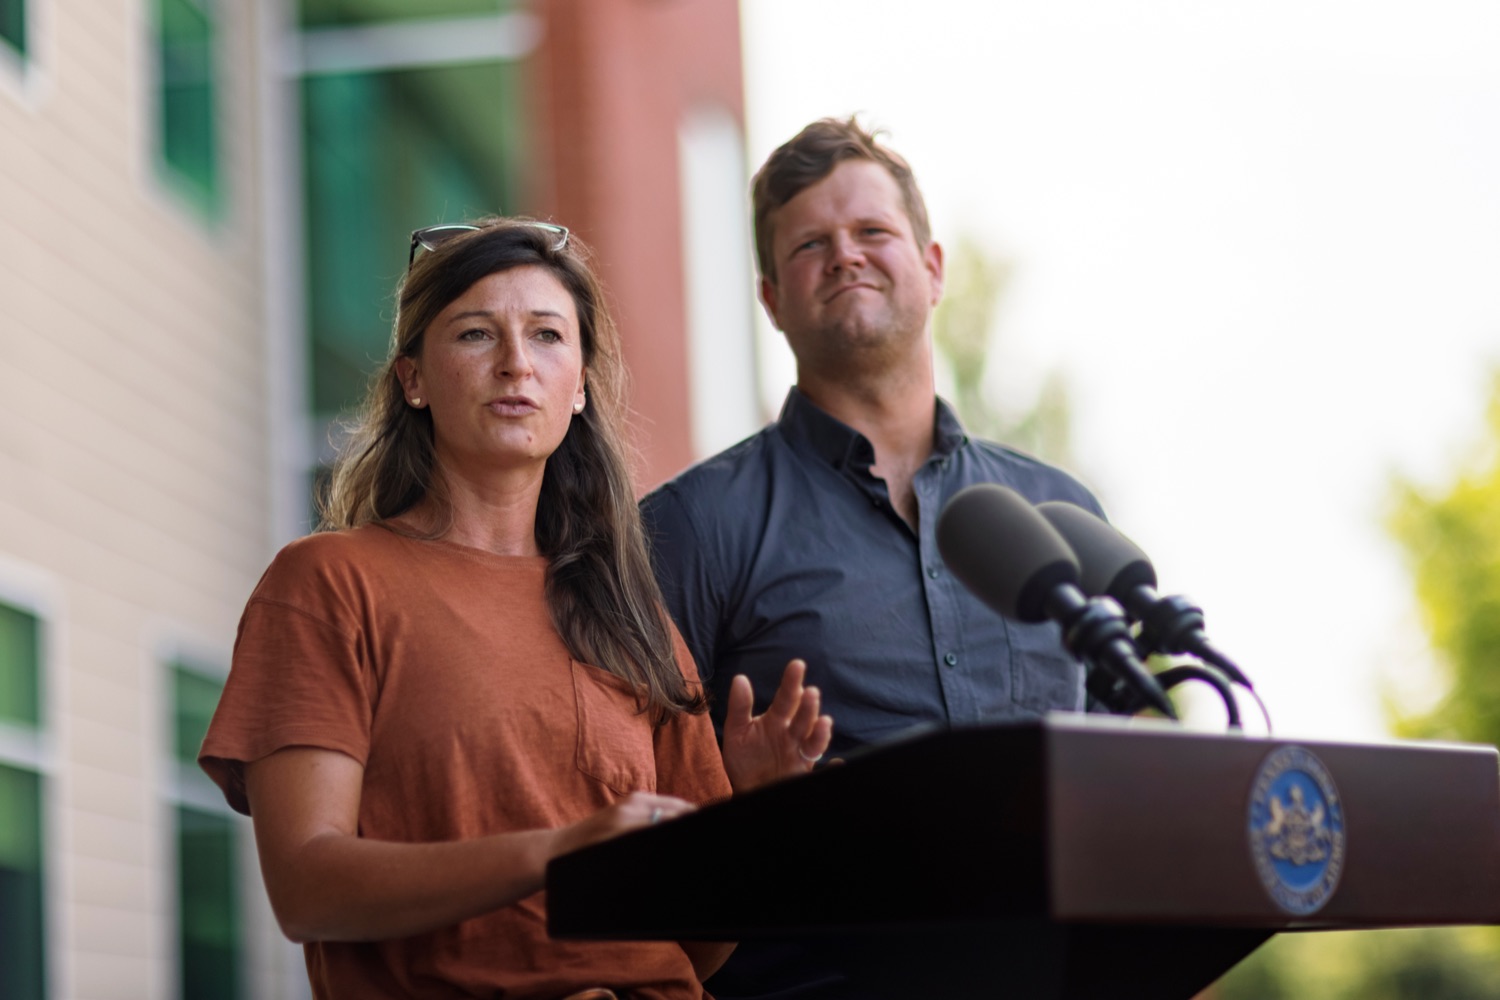 Matt and Julie Henninger, of Good Keeper Farm, speak during a press conference, which highlighted the success of Pennsylvania's farm to school programs, at Hill Top Academy in Mechanicsburg on Friday, August 27, 2021.<br><a href="https://filesource.amperwave.net/commonwealthofpa/photo/19054_AGRIC_FarmToSchool_NK_009.jpg" target="_blank">⇣ Download Photo</a>